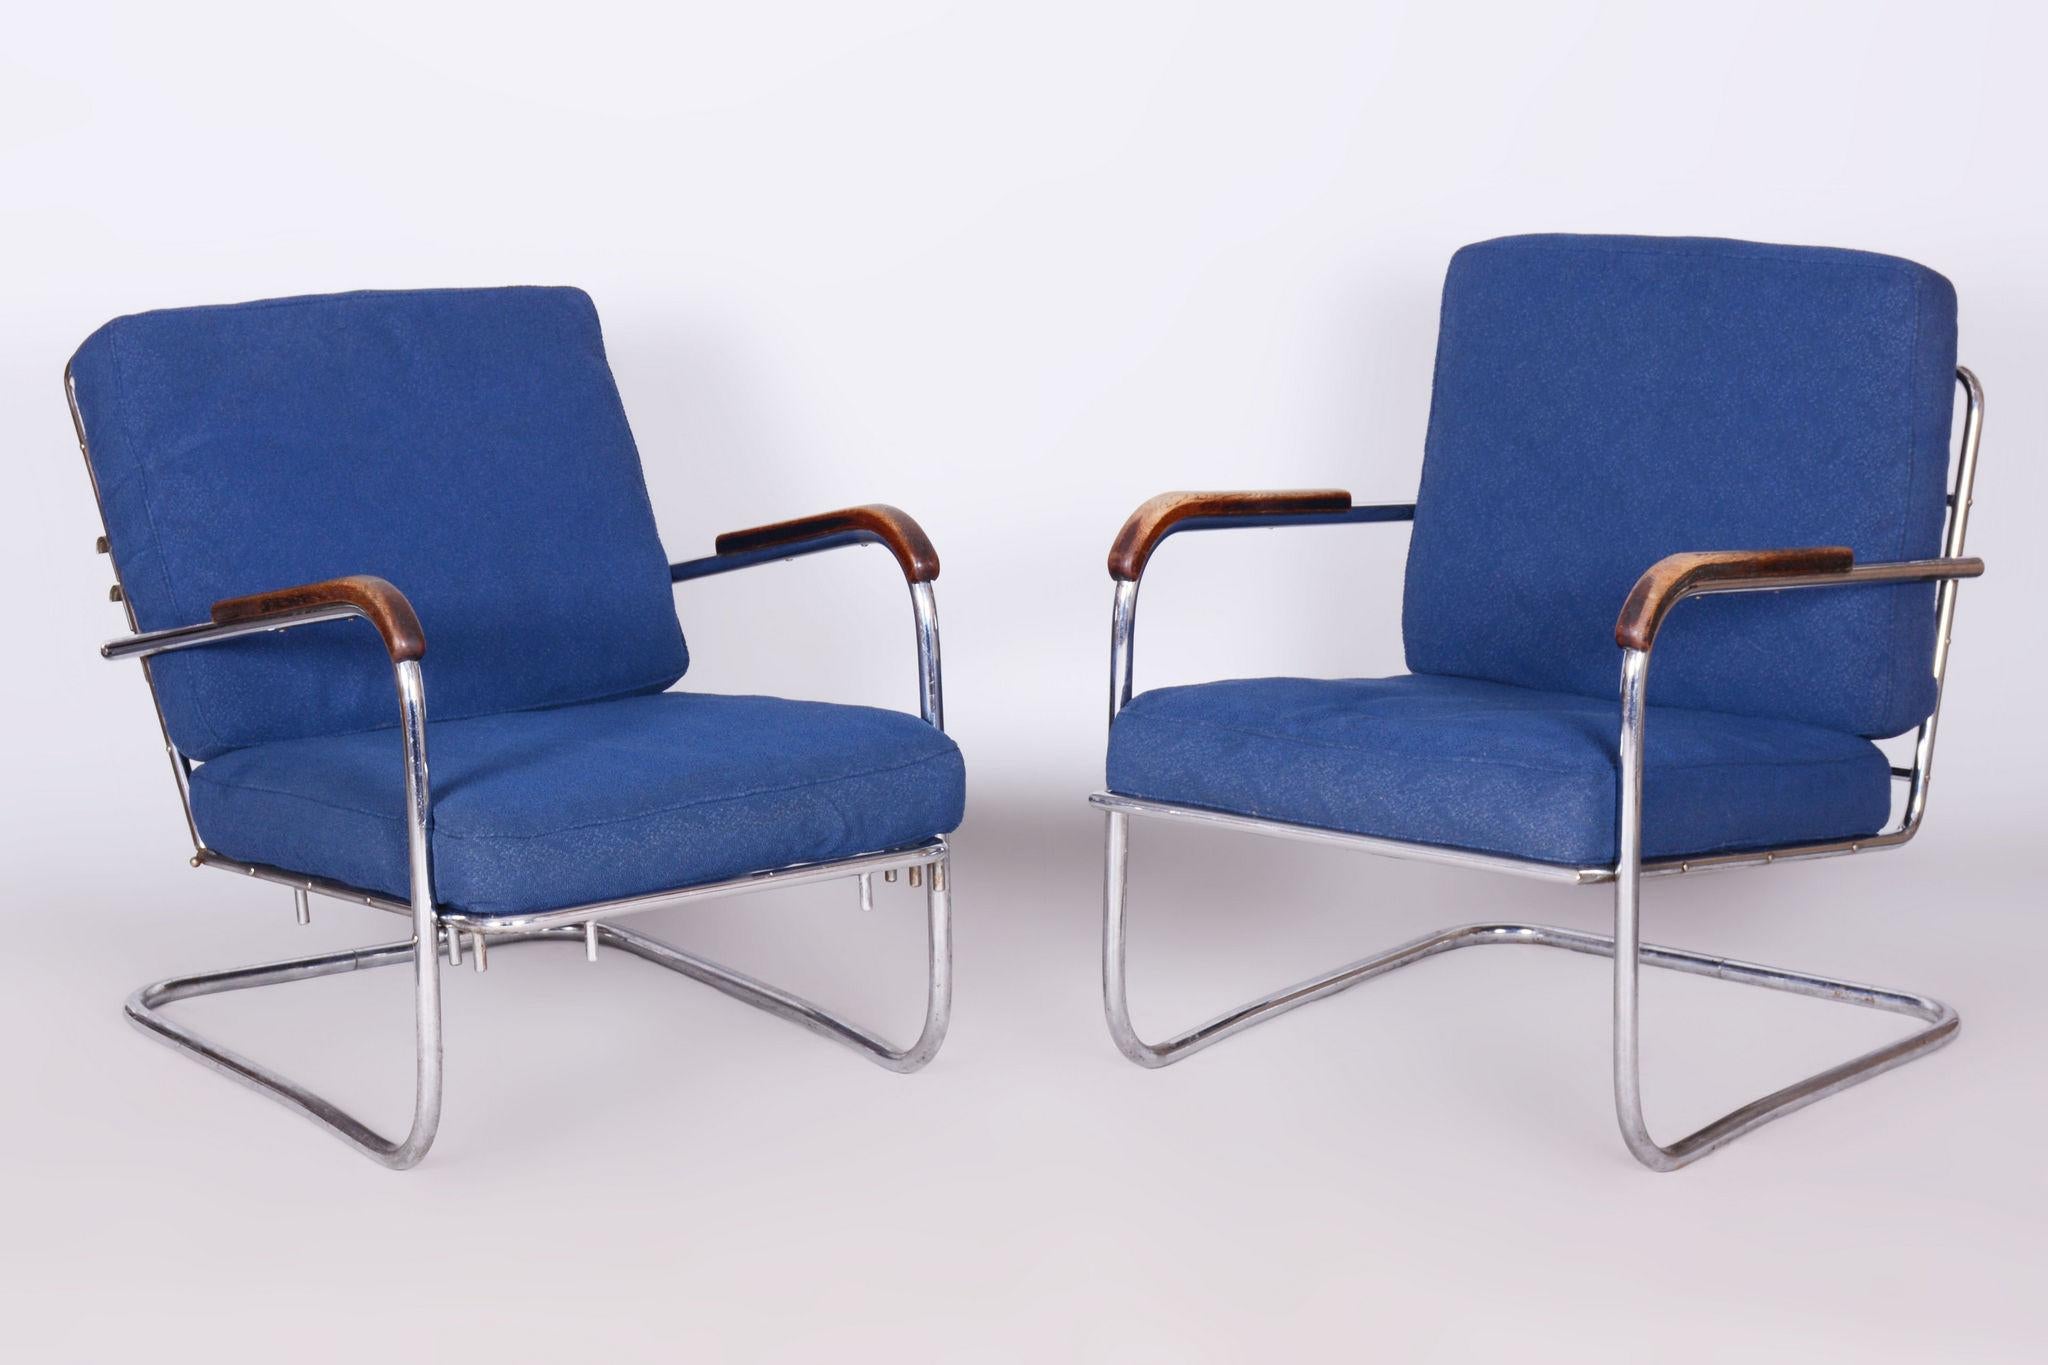 Original Bauhaus Pair of Armchairs, Chrome-Plated Steel, Switzerland, 1930s In Good Condition For Sale In Horomerice, CZ